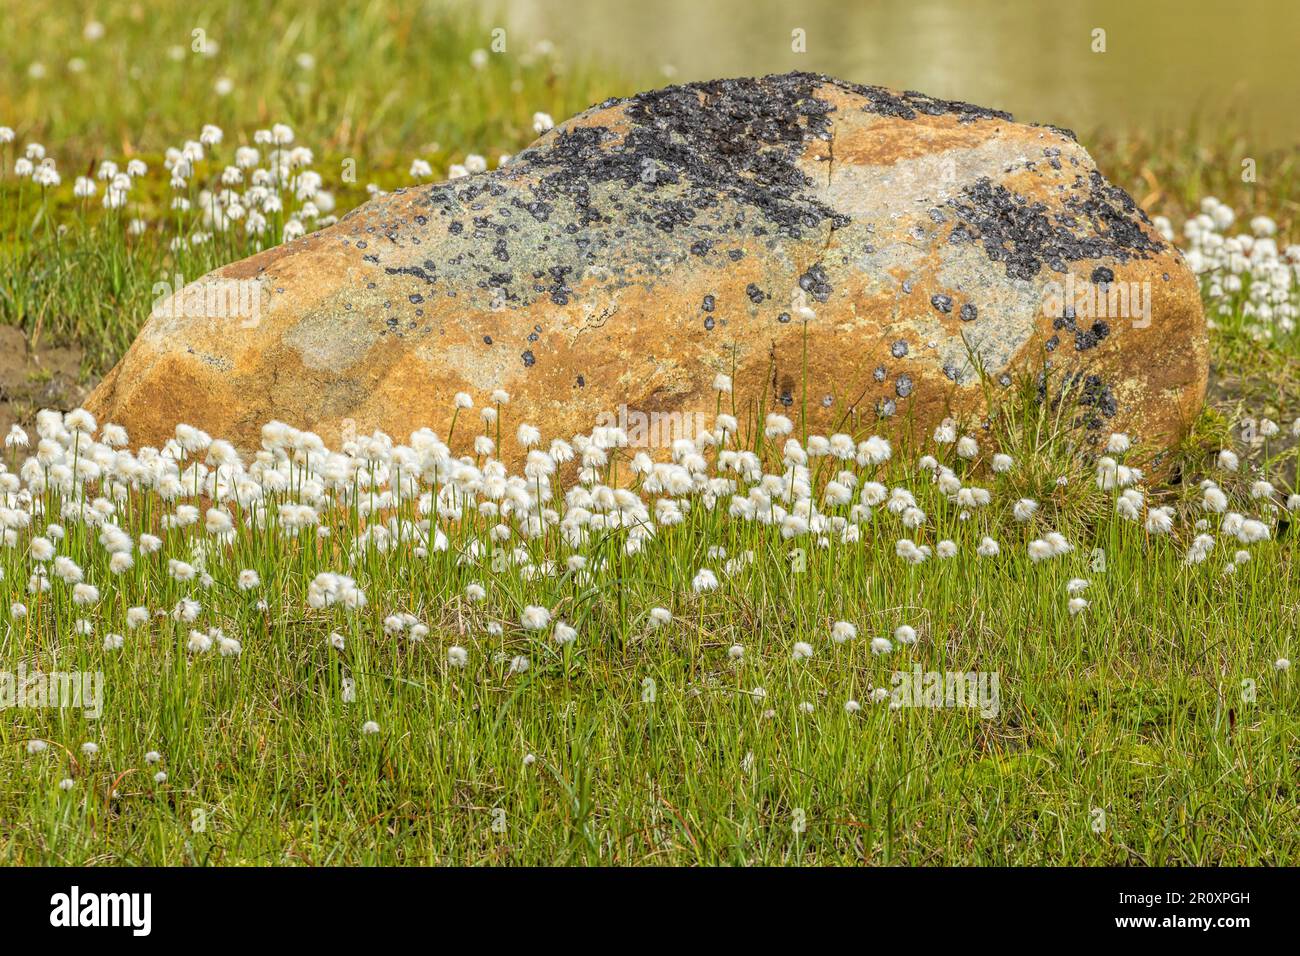 White cottongrass that bloom on the meadow with a colorful rock Stock Photo